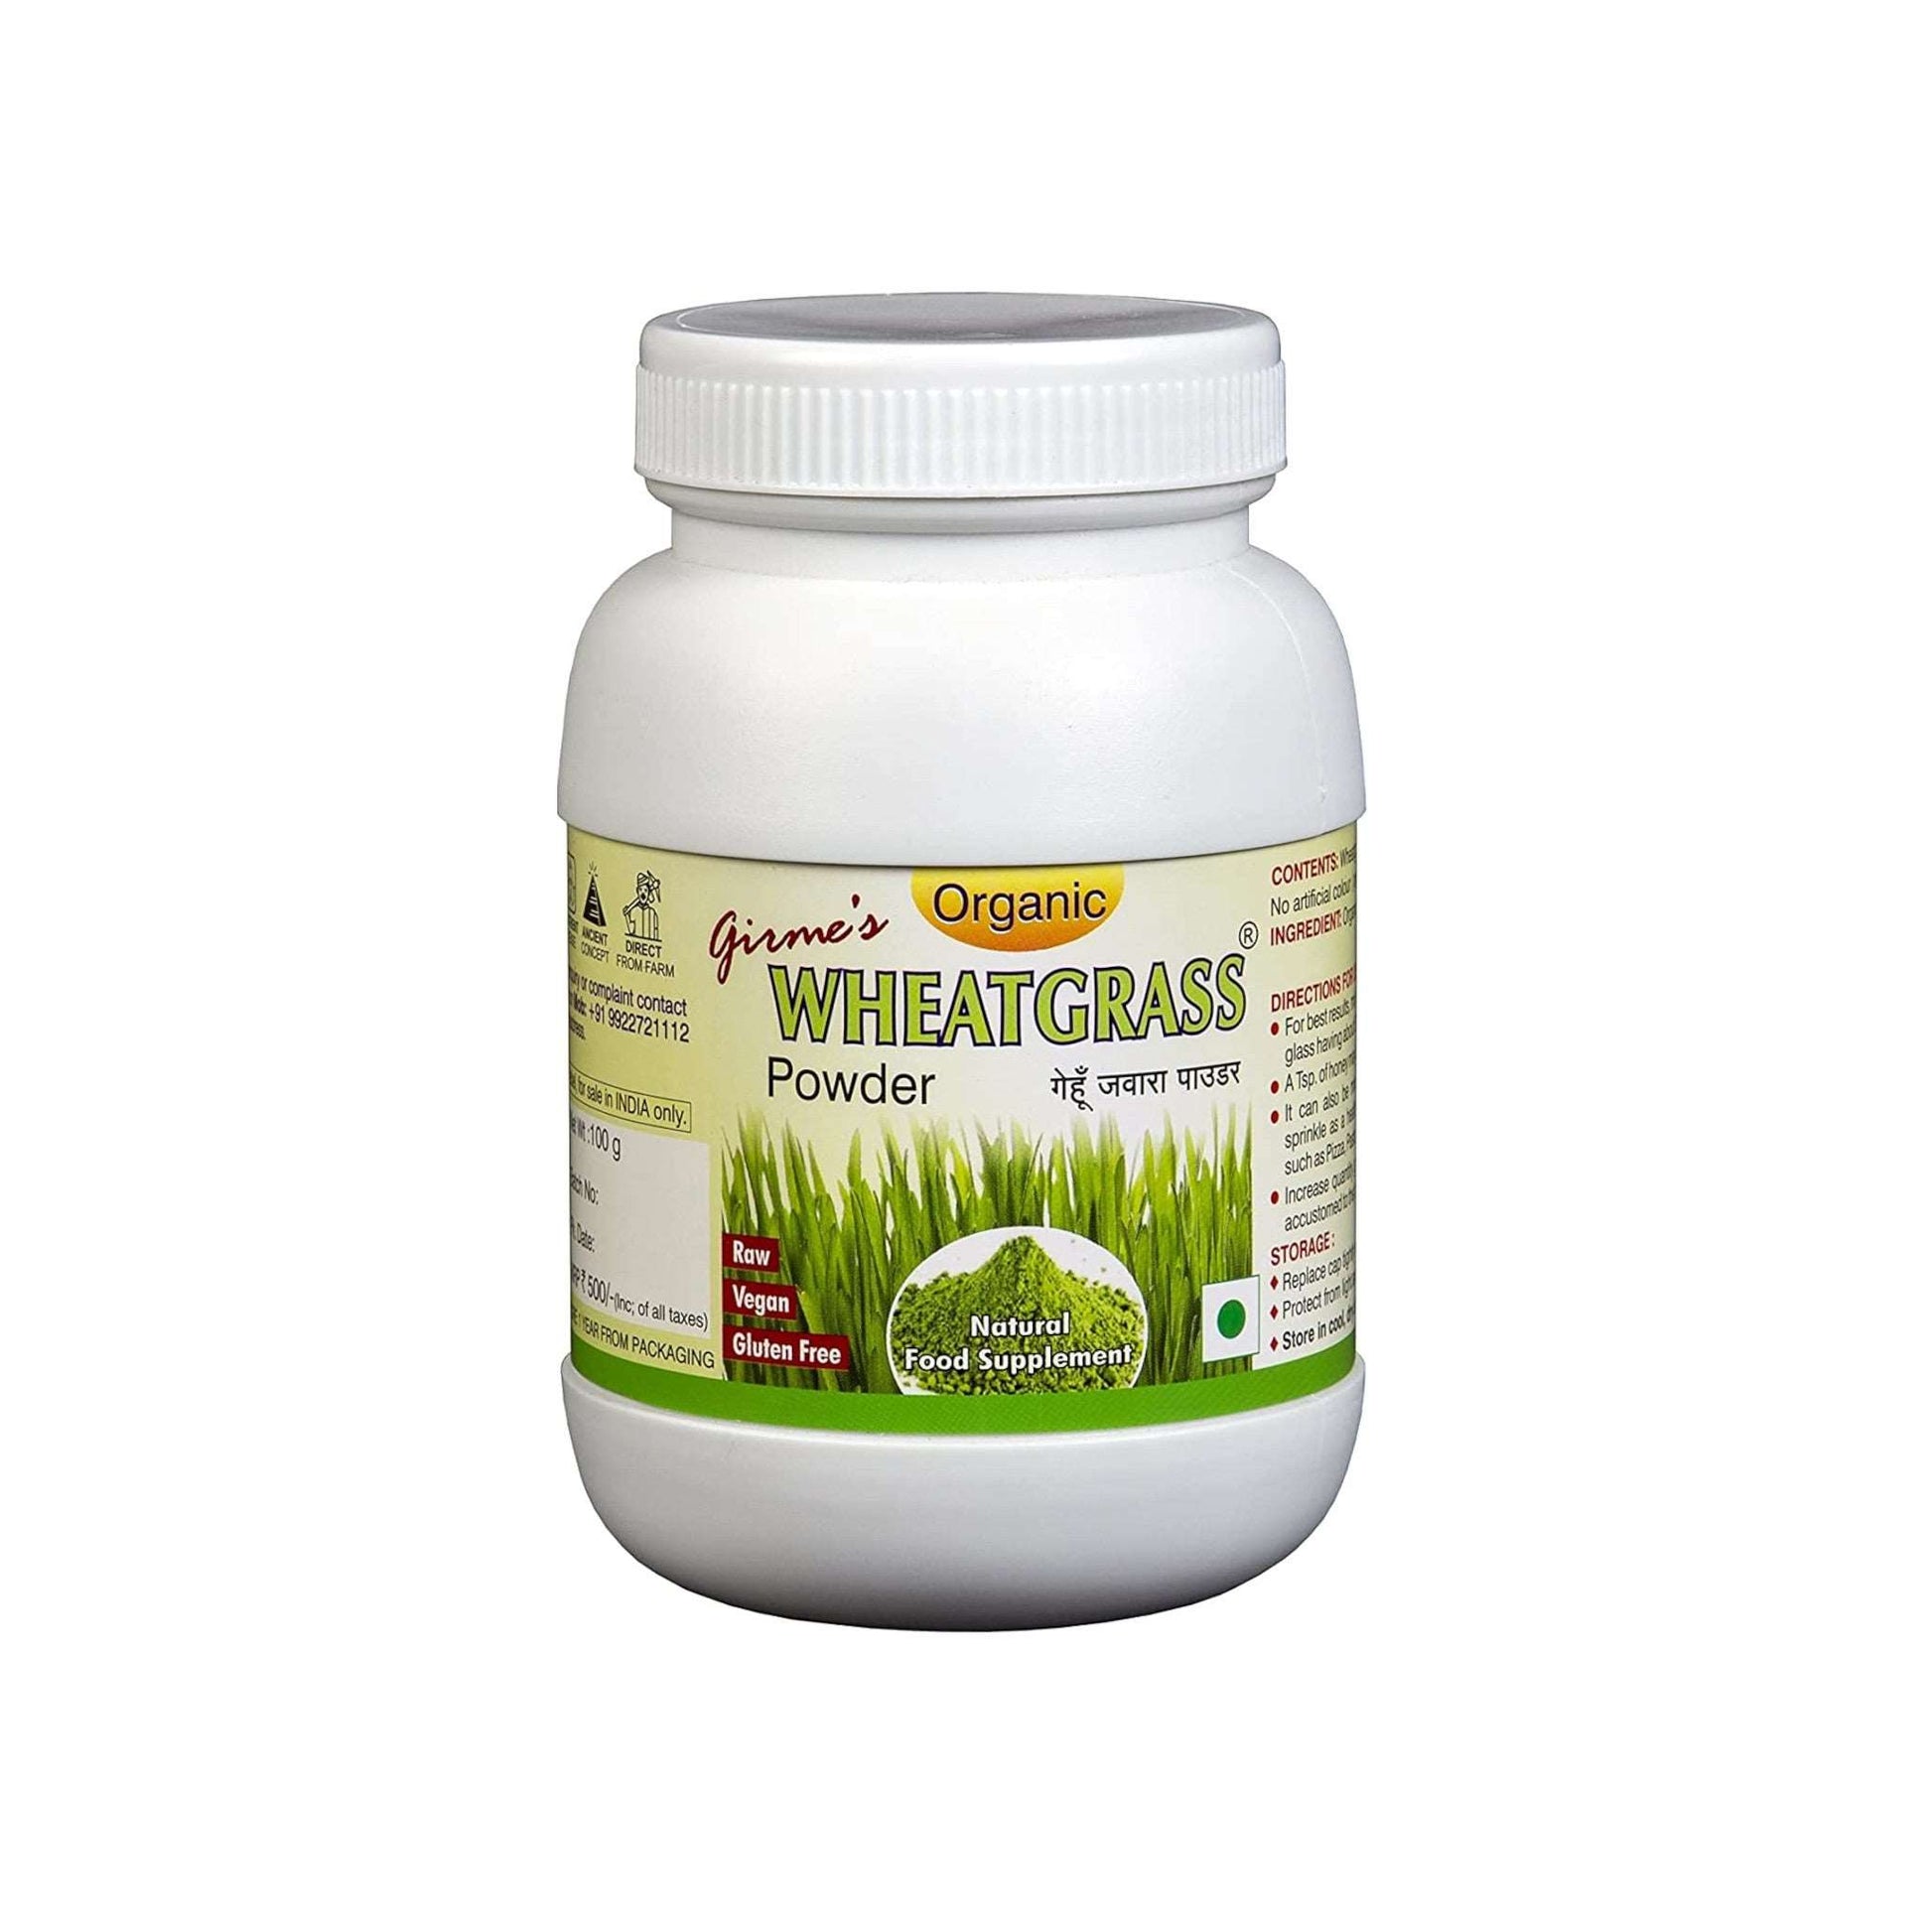 Image: Girme's Wheatgrass Powder 100 g - Nutrient-packed superfood with antioxidants and immune-boosting benefits.